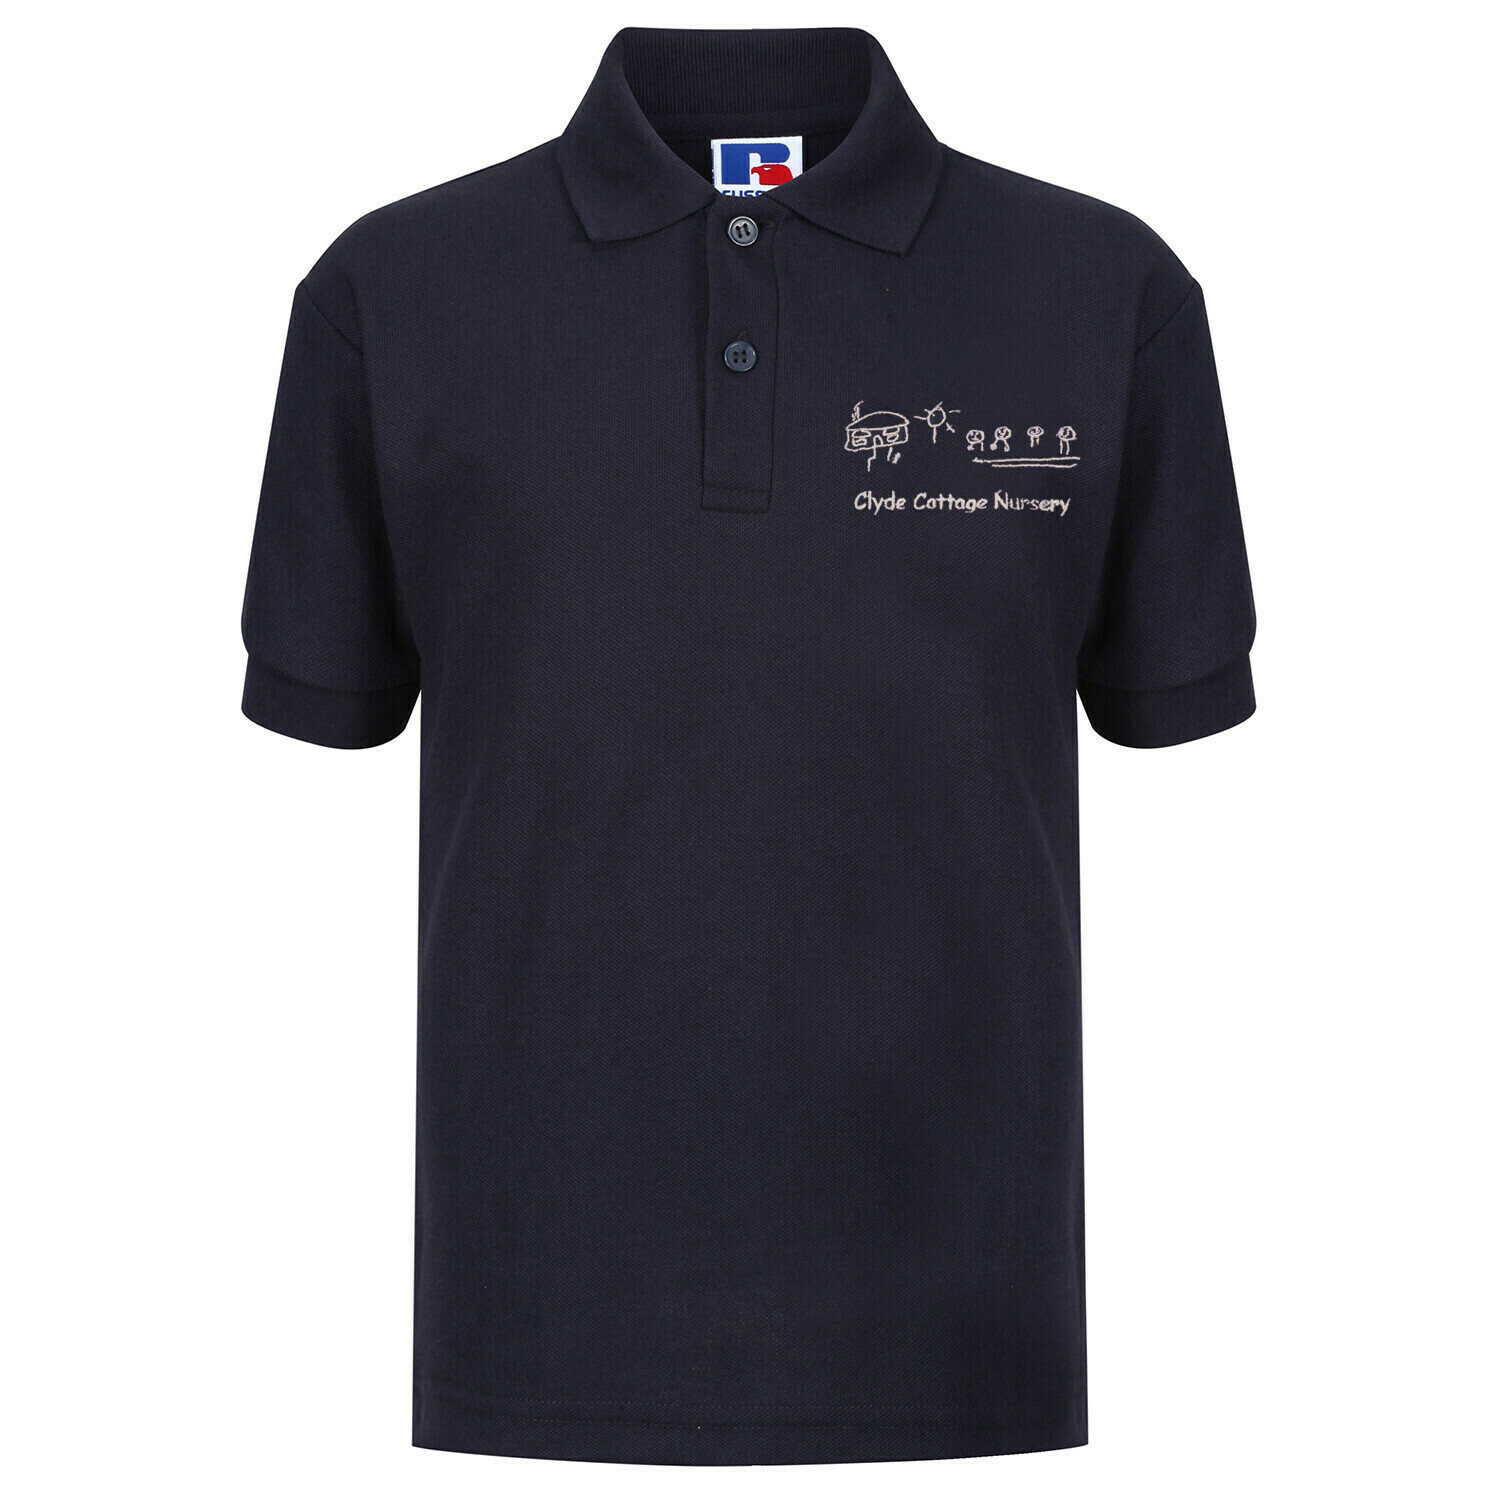 Clyde Cottage Nursery Staff Polo (Unisex) (RCS539M)